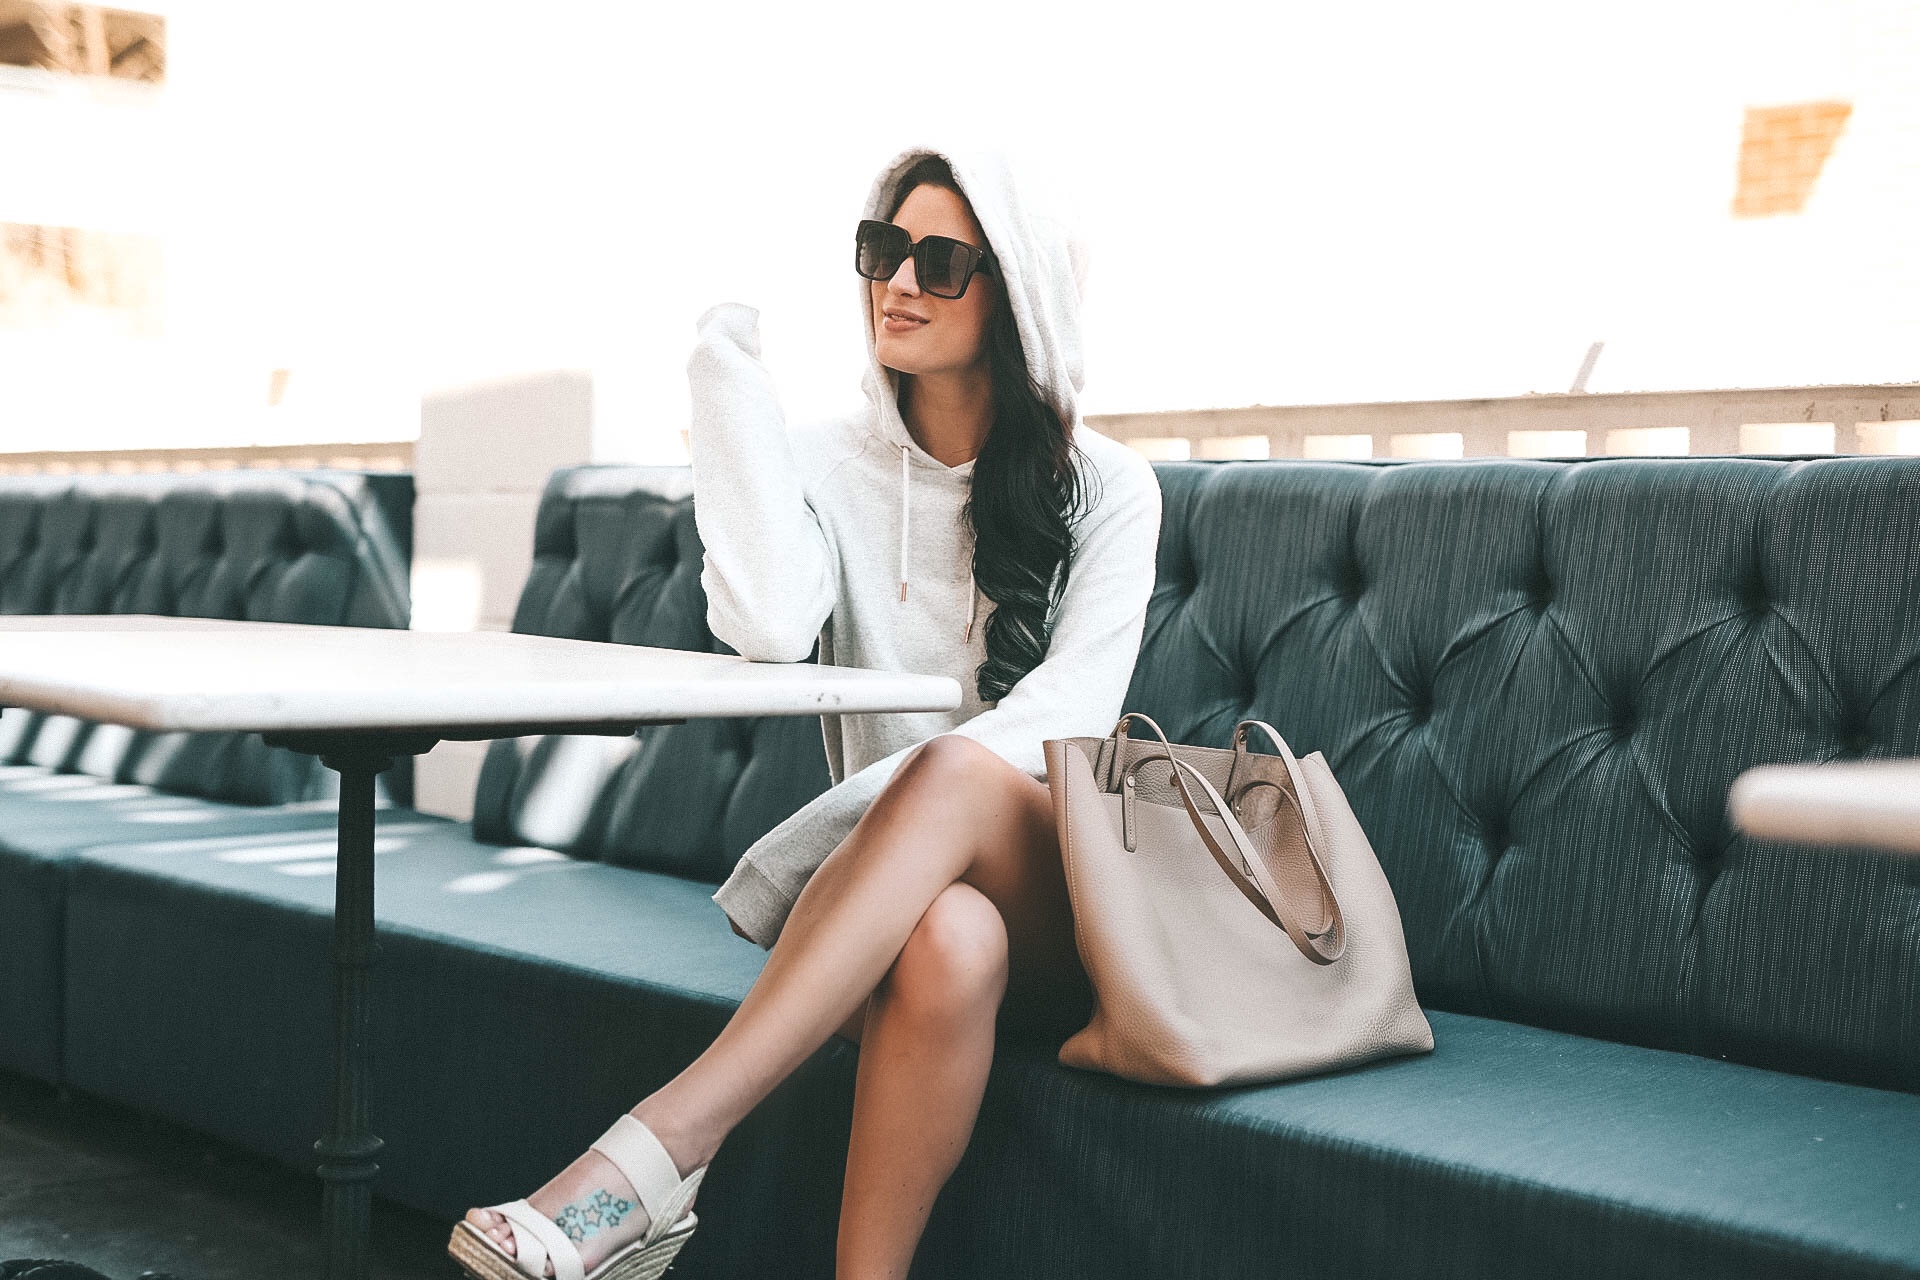 DTKAustin shares how to pull off the athleisure trend for Spring & Summer w/Zappos and Cotton. Hoodie by Volcom, Tote by Gigi New York, Shorts from Target. - Athleisure Trend for Summer w/Cotton & Zappos by popular Austin style blogger Dressed to Kill